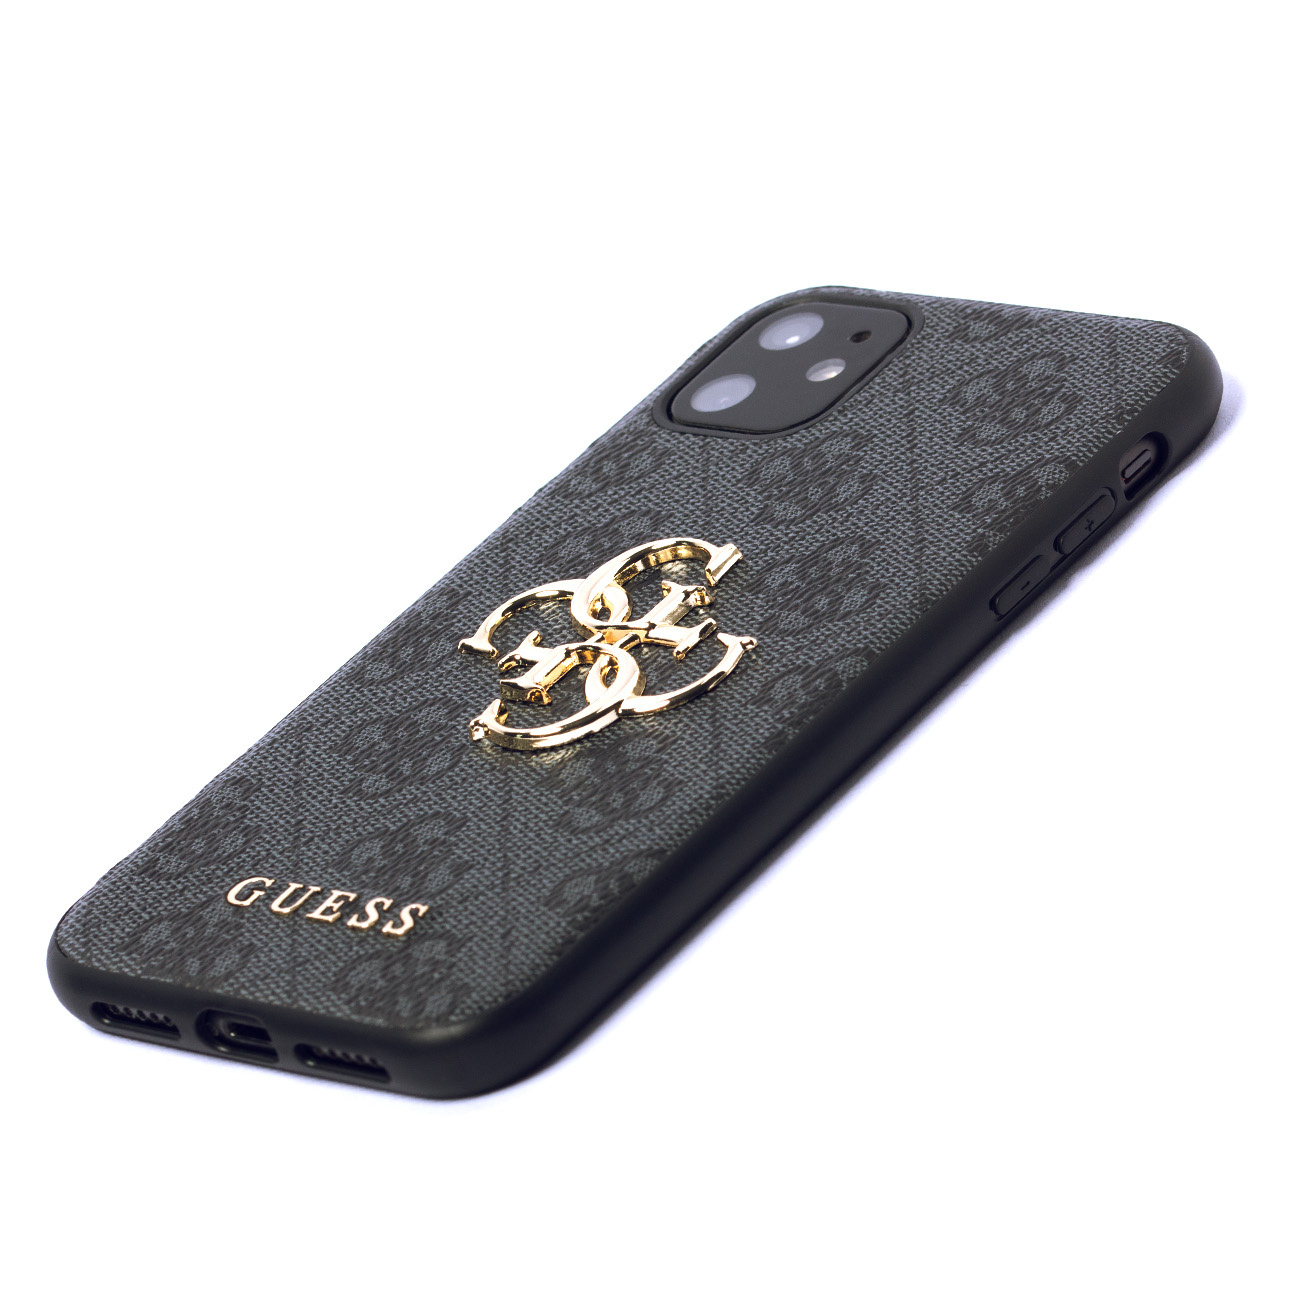 Elegant and timeless Guess case for iPhone 11 / XR from the 4G Big Metal Logo series